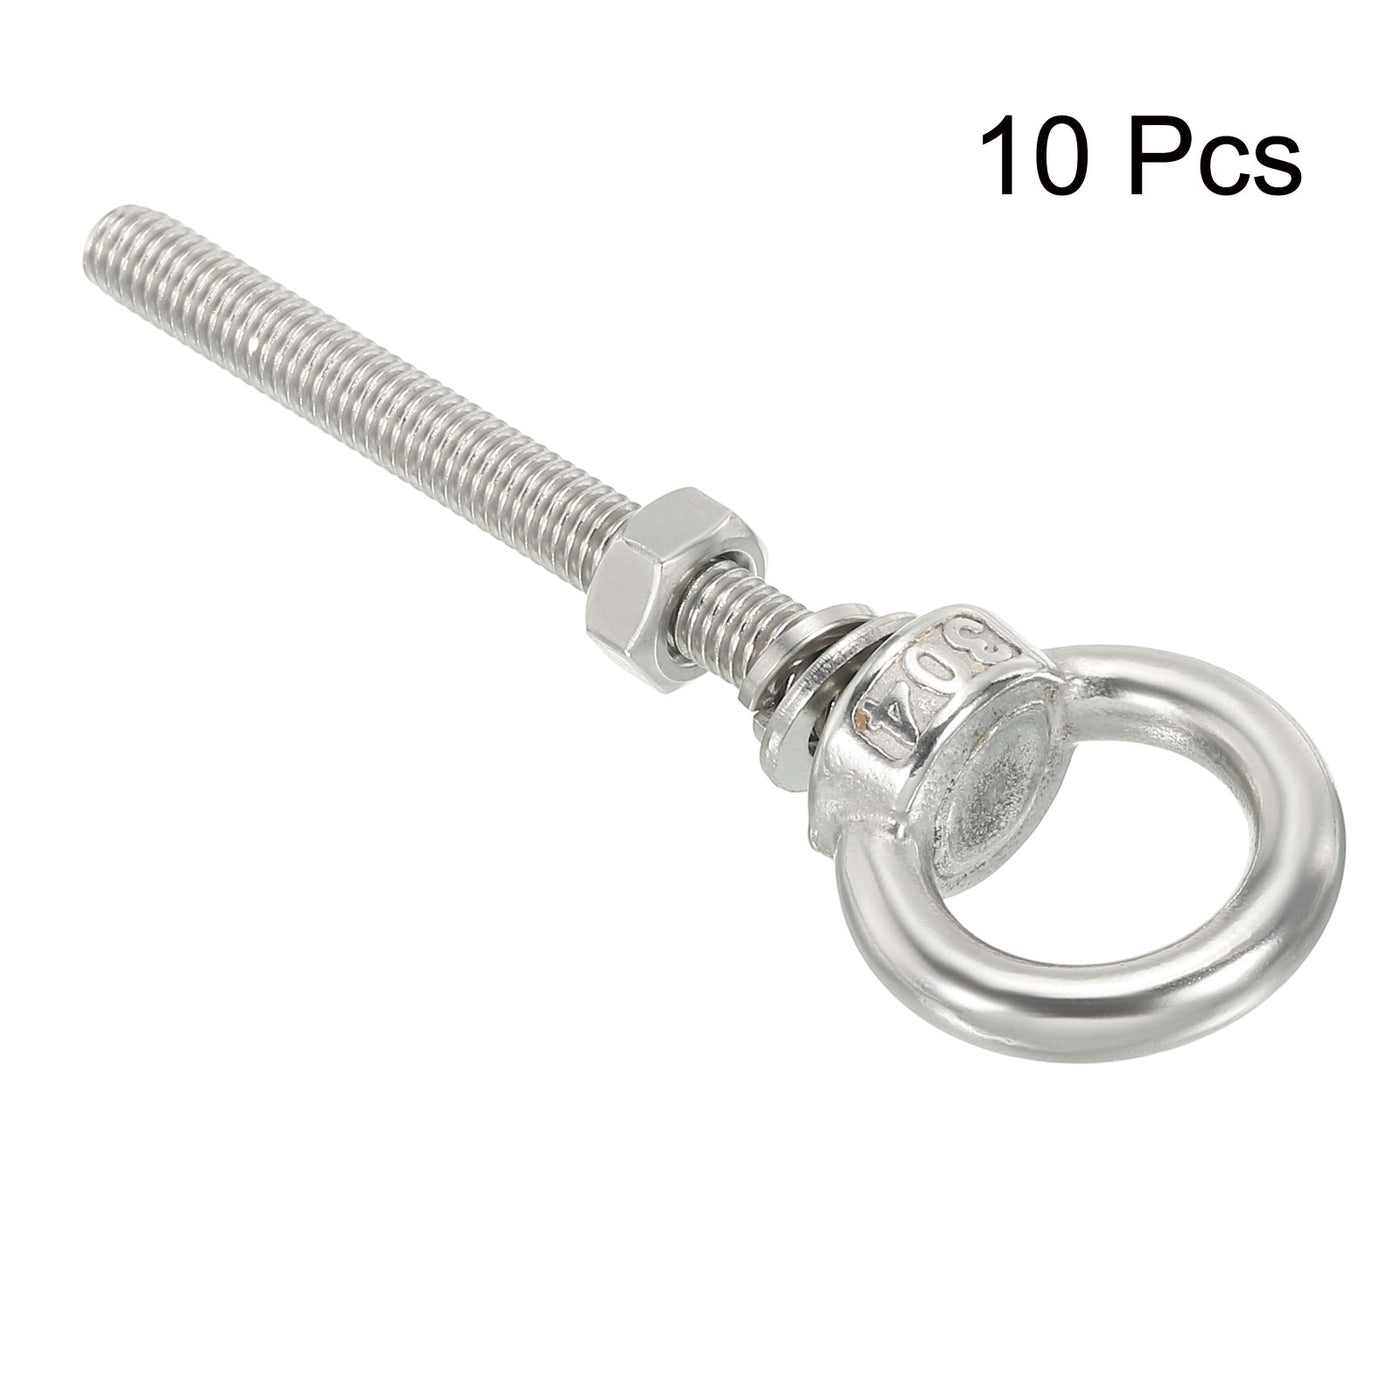 uxcell Uxcell M6x60 1/4"x2-2/5" Stainless Steel Eye Bolts Threaded Screw Eyebolt Shoulder Ring with Nuts Washers for Lifting Hanging, 10 Set